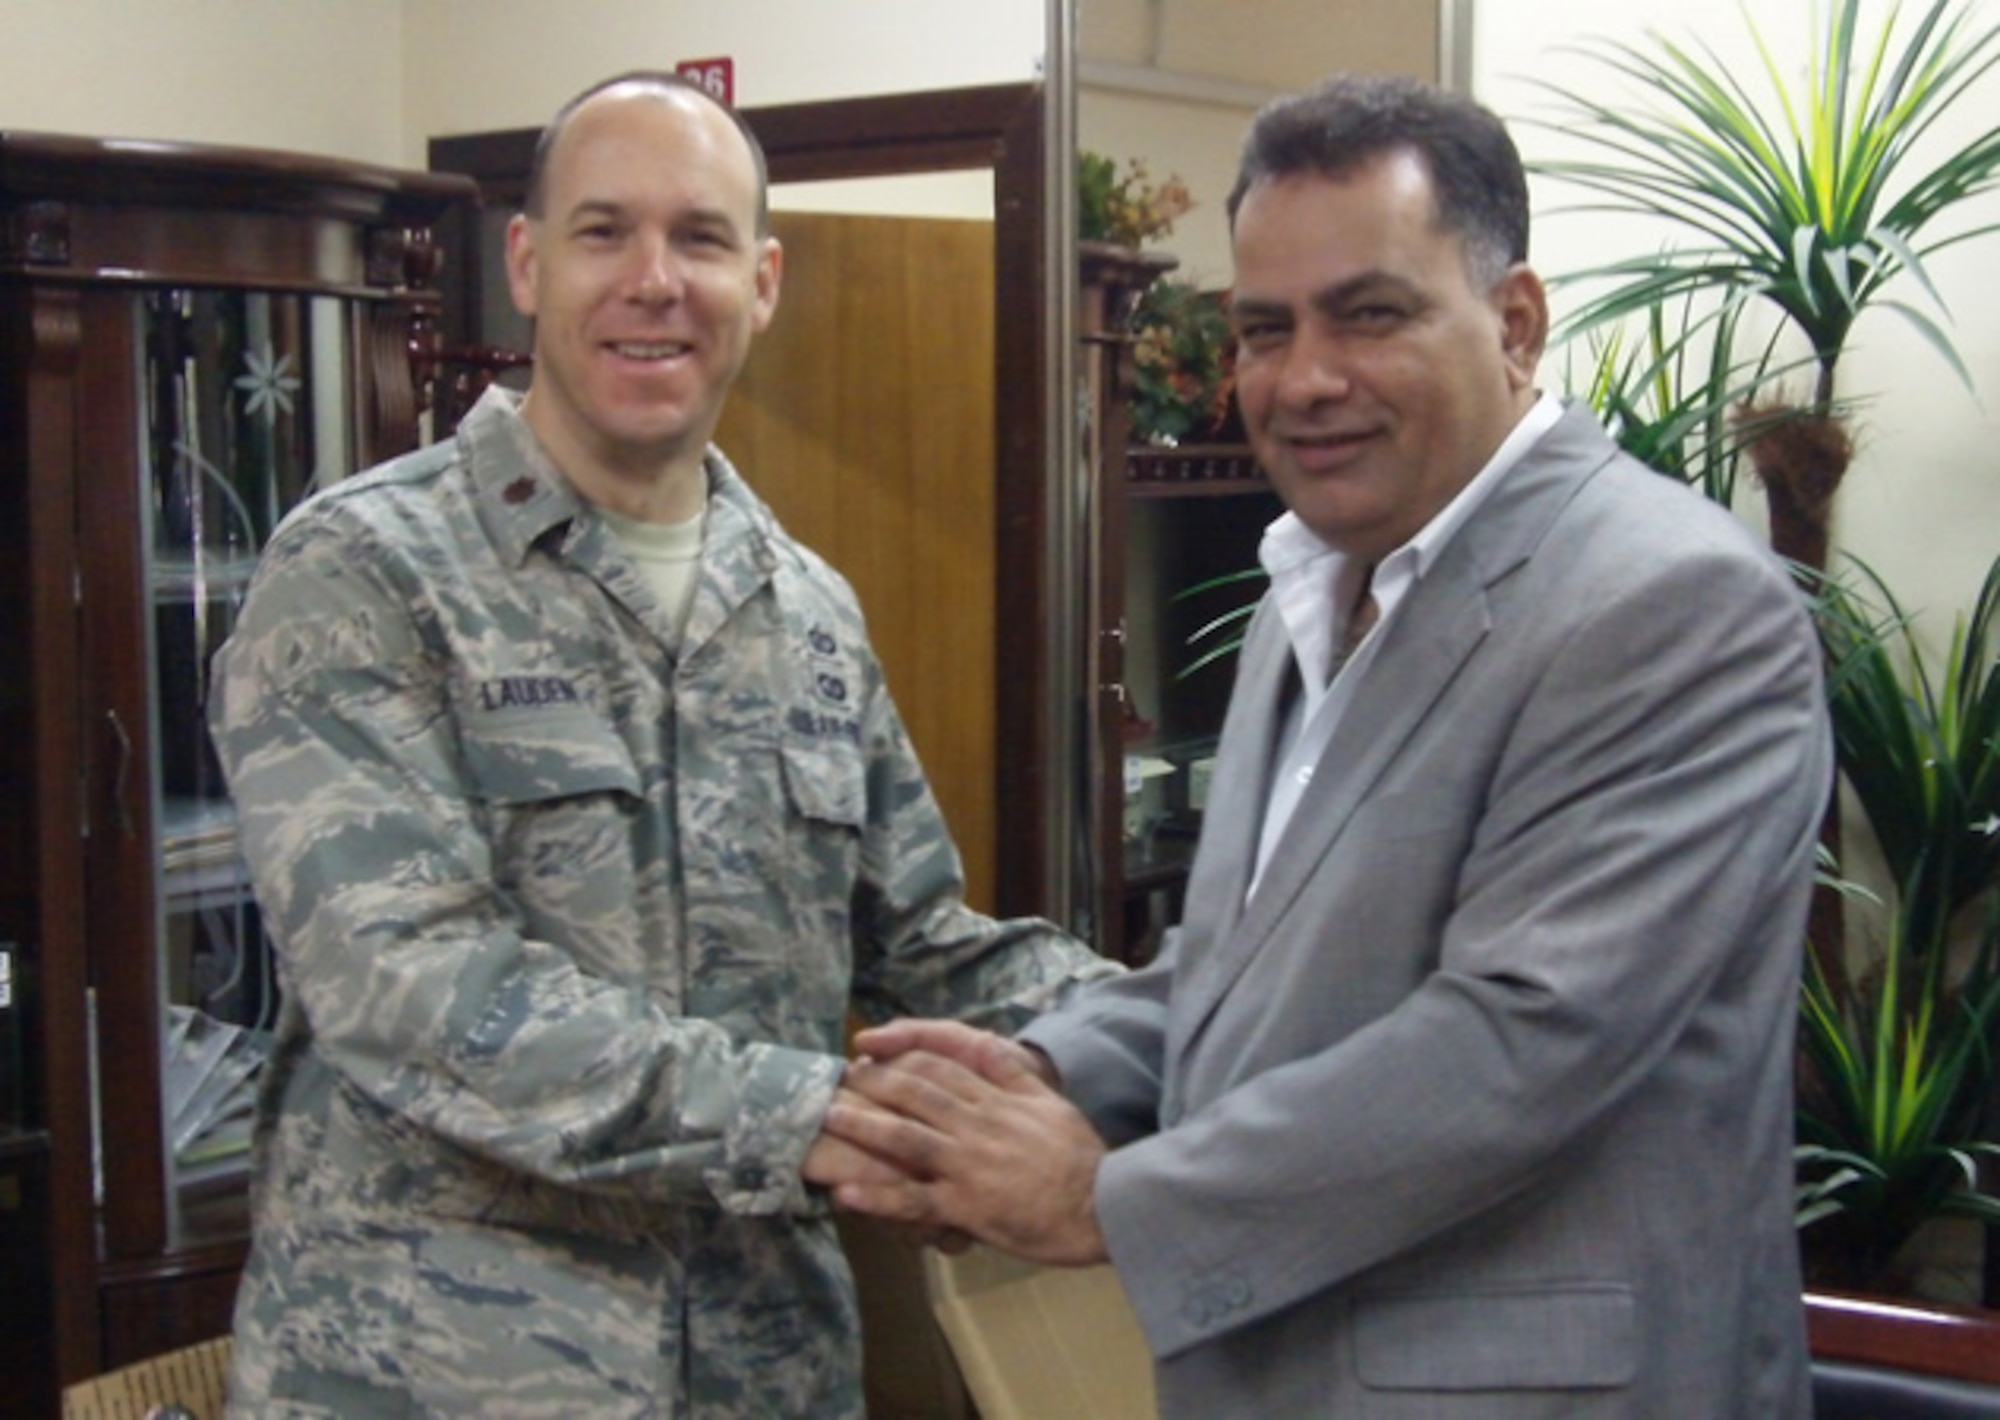 Maj. Michael Lauden, director of operations for ESC’s Air Force Distributed Common Ground Systems Division, currently deployed in Iraq, is thanked by Mazin Zayer Al-Lamy, director general for Contracts and Sales in the Iraqi Ministry of Defense, for the support he provided in collecting donations for the family of Mr. Al-Lamy's driver, who had passed away after being shot by an insurgent. (Courtesy photo)  